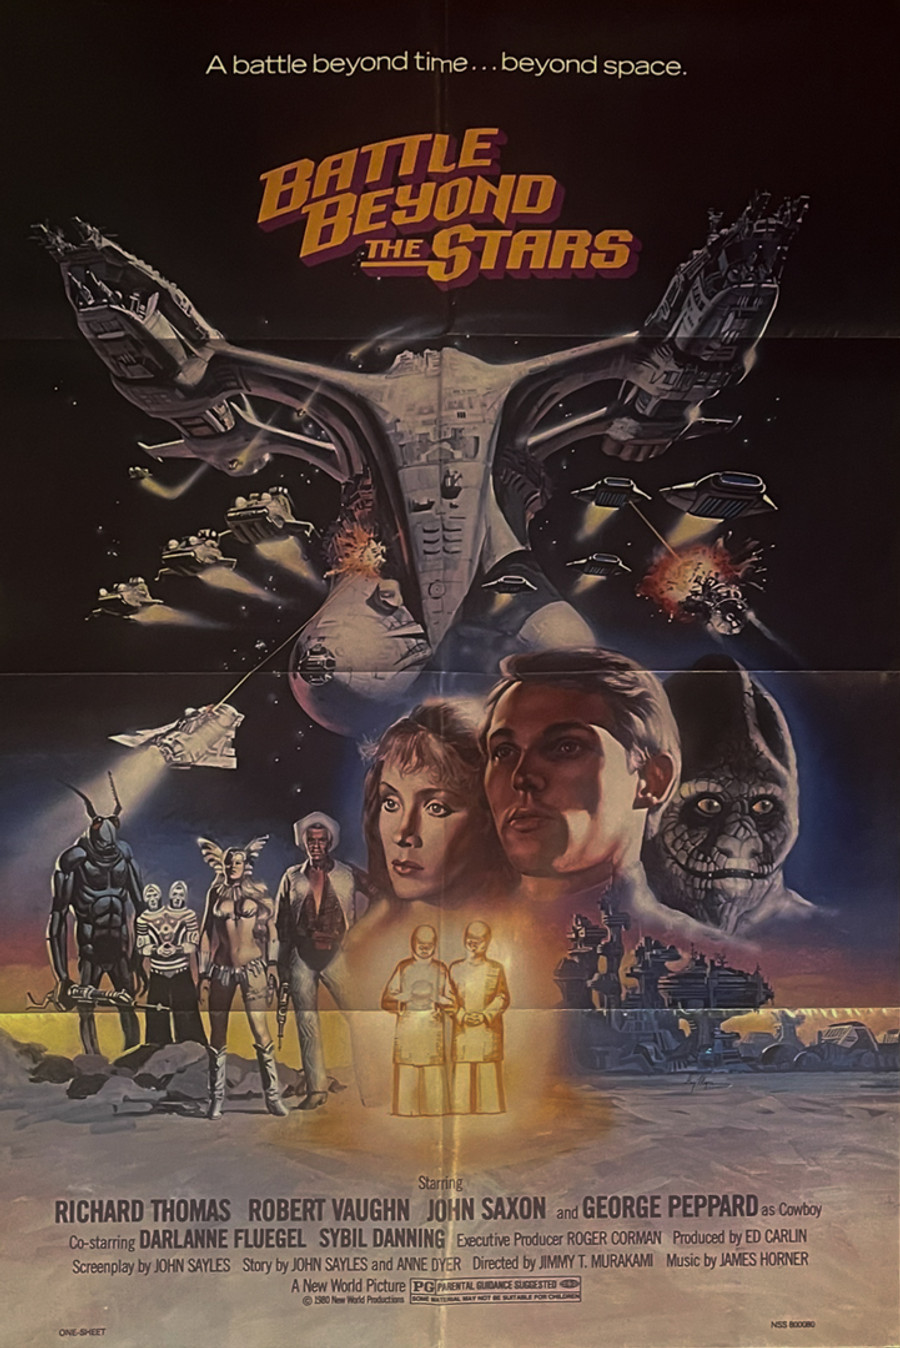 Battle Beyond the Stars, original US one sheet style A movie poster printed circa 1980. A- condition. Prior folds.